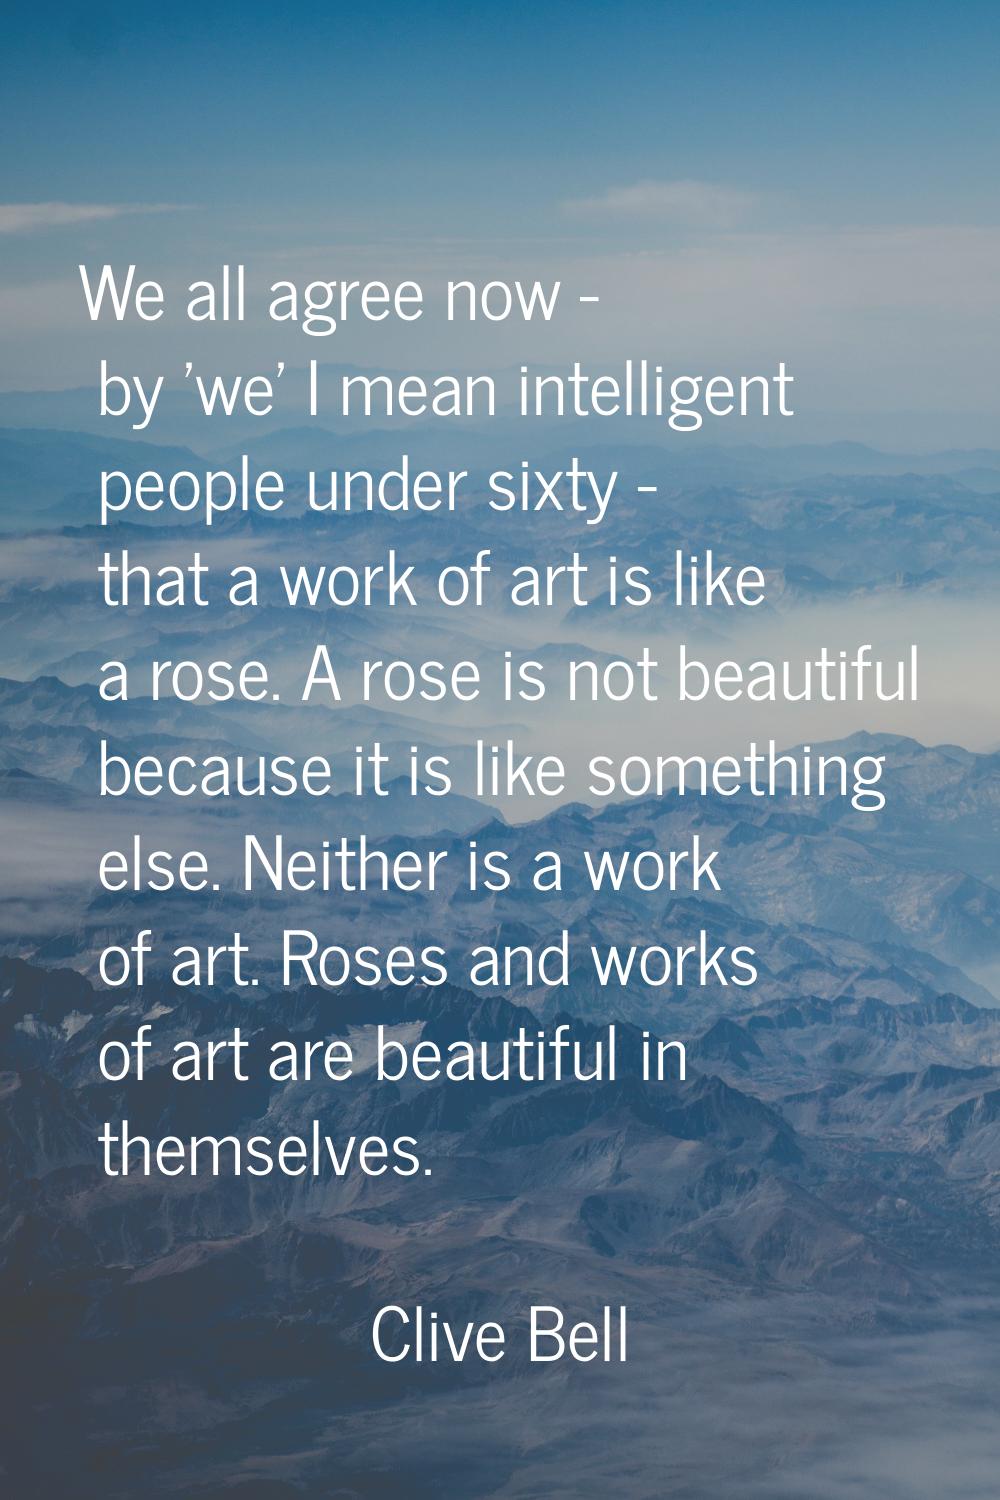 We all agree now - by 'we' I mean intelligent people under sixty - that a work of art is like a ros